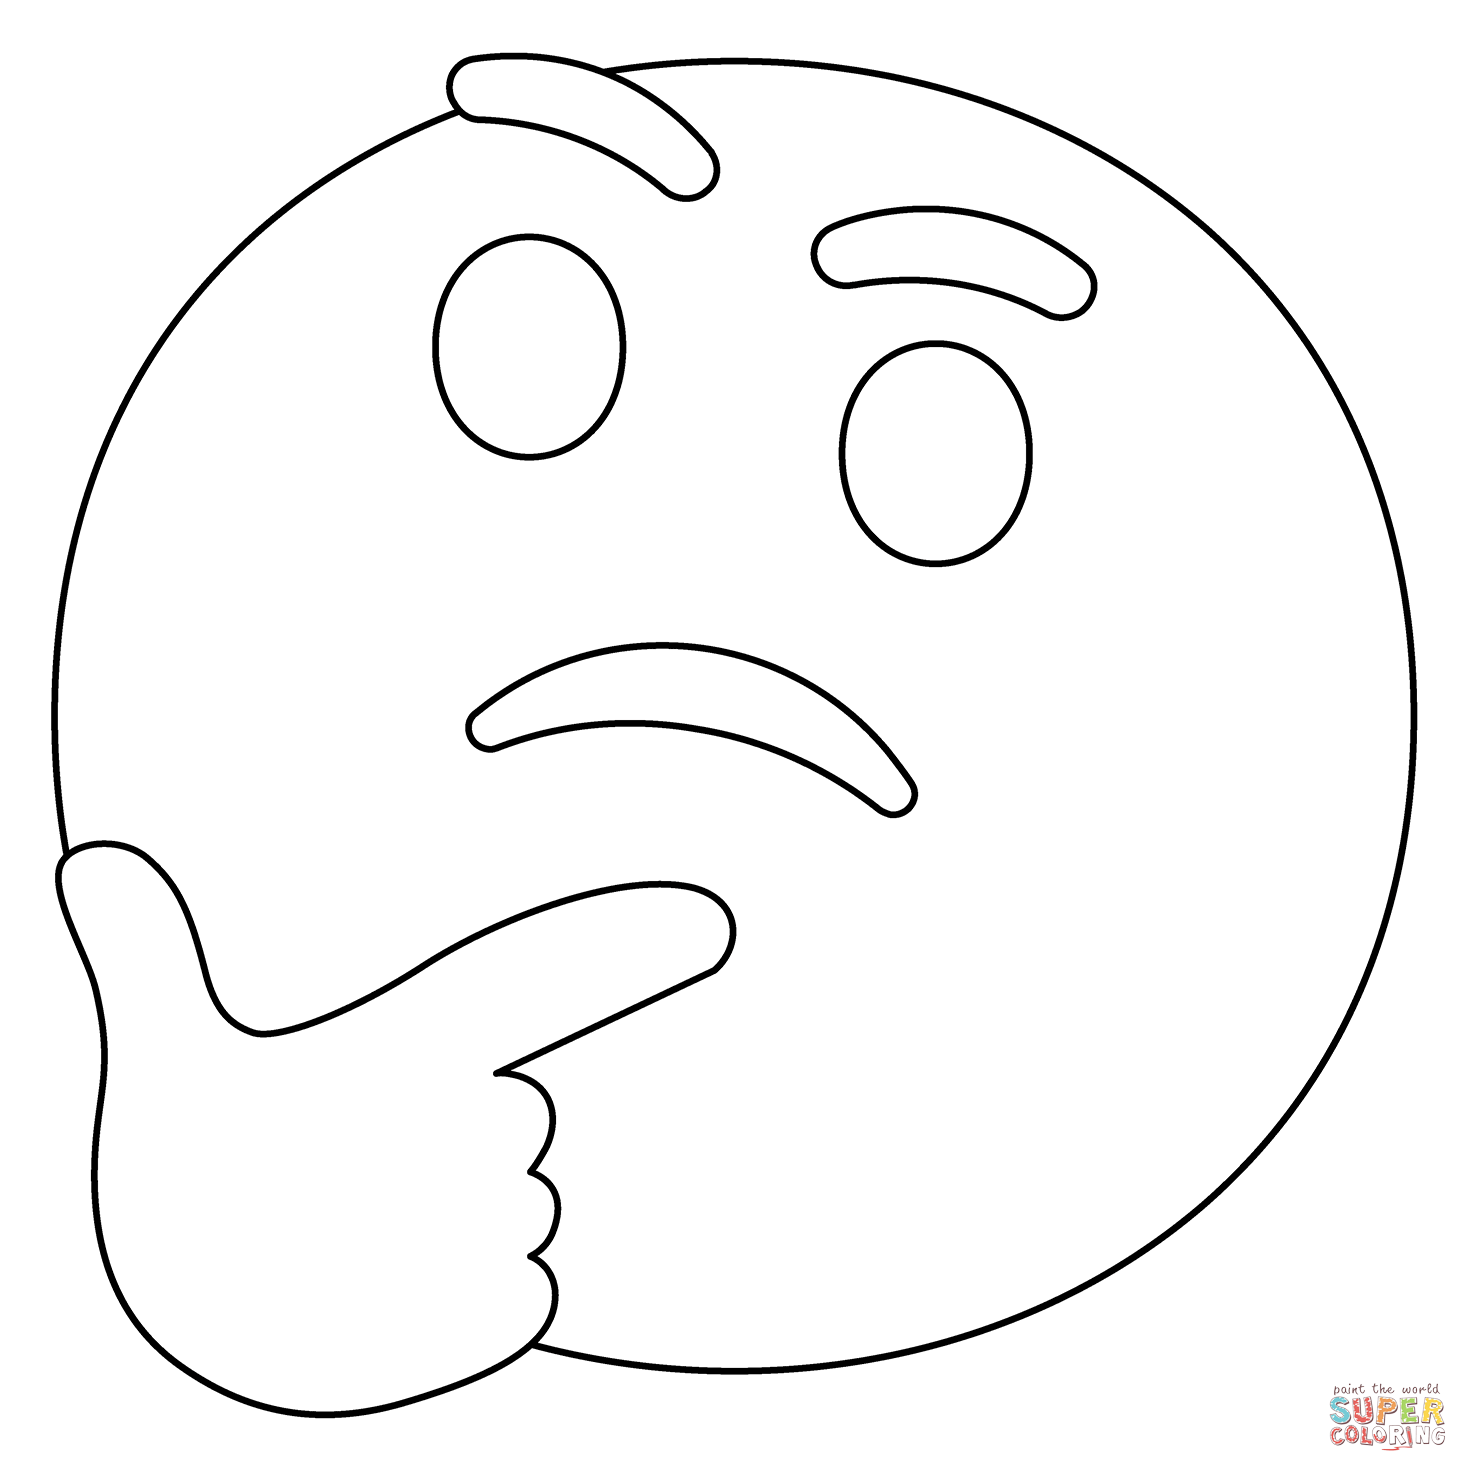 Thinking face emoji coloring page free printable coloring pages